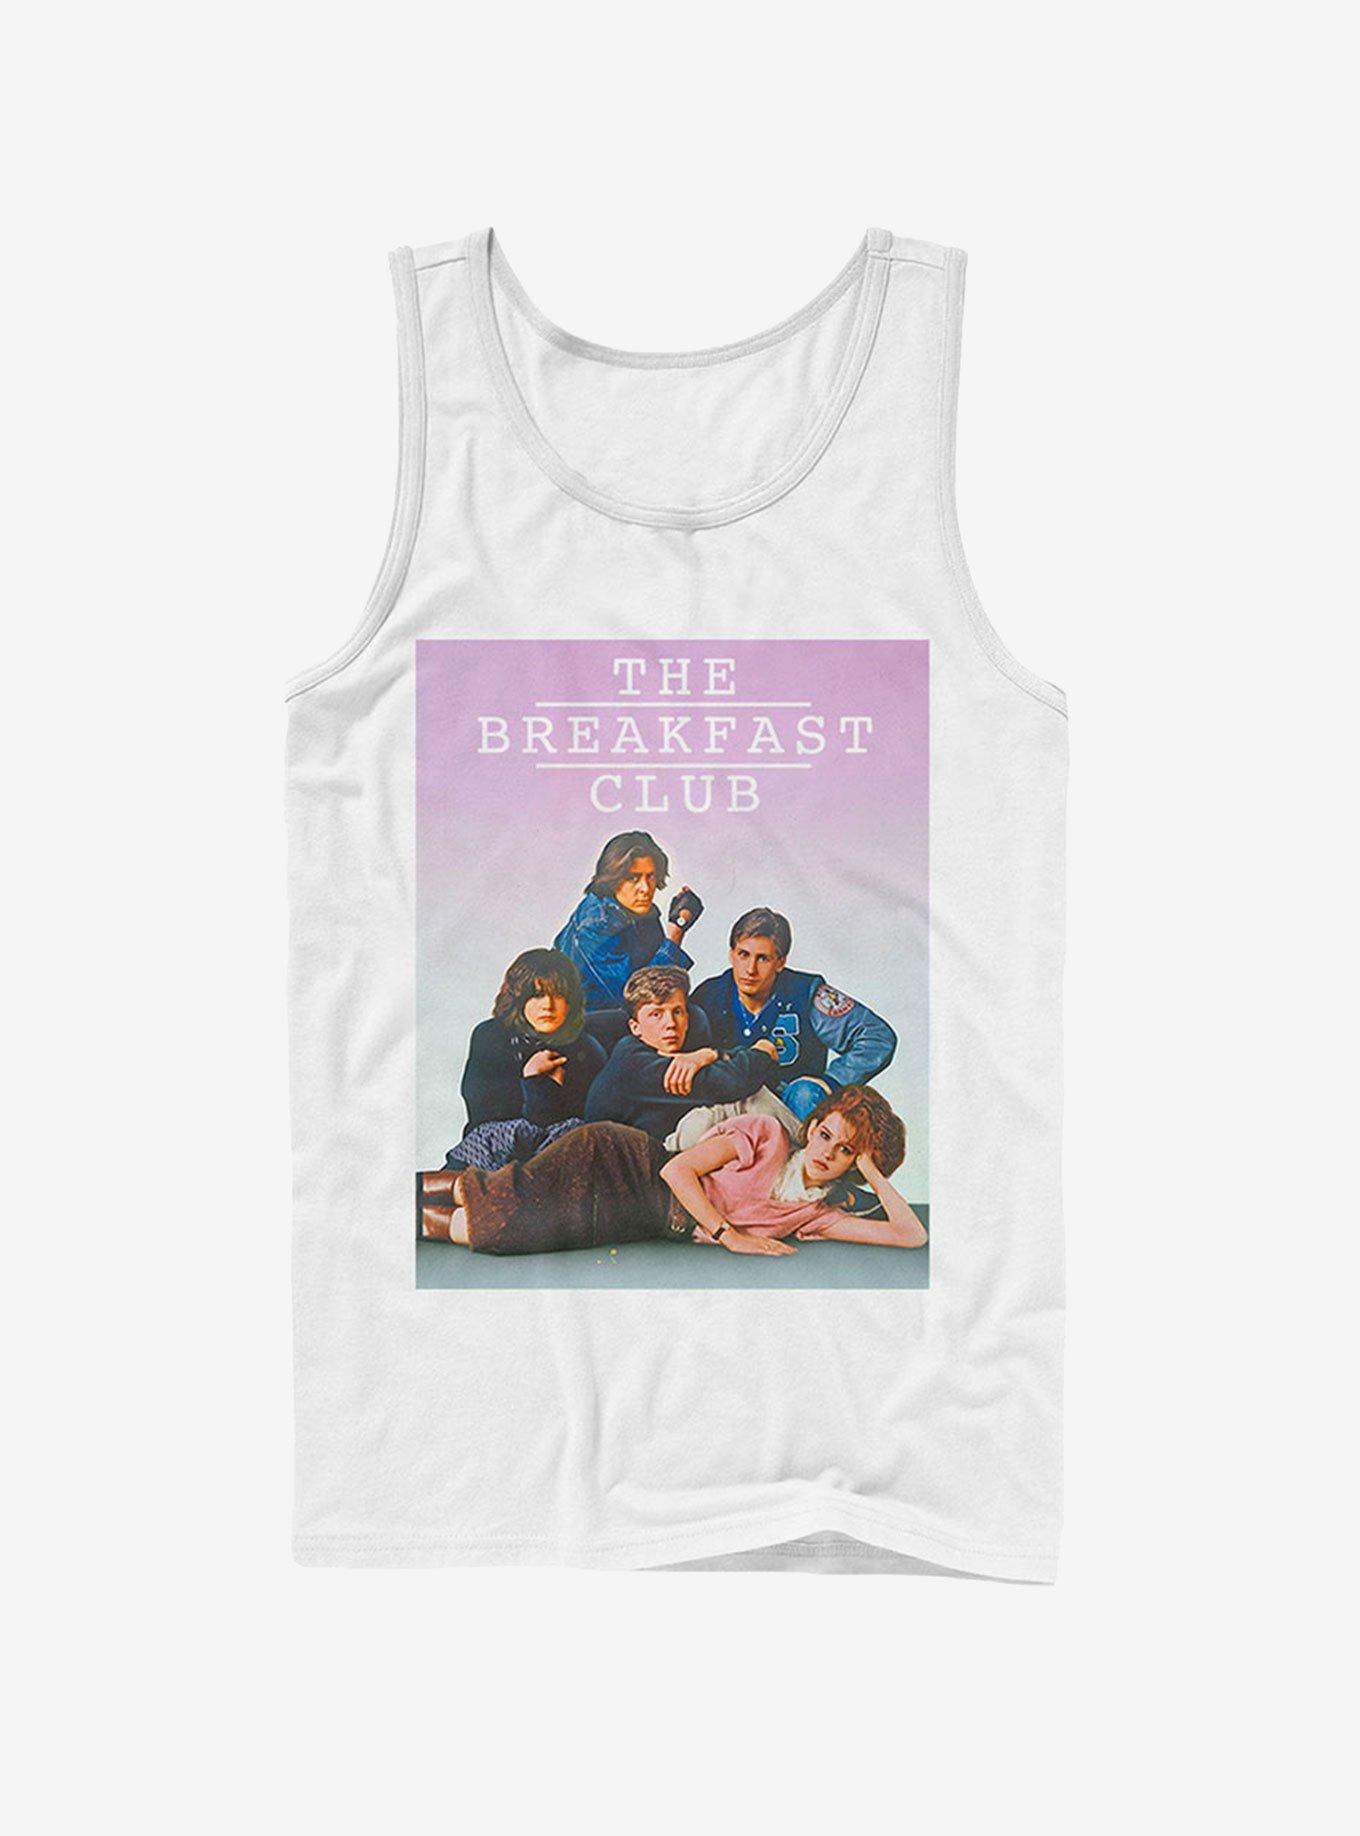 The Breakfast Club Iconic Detention Pose Tank Top